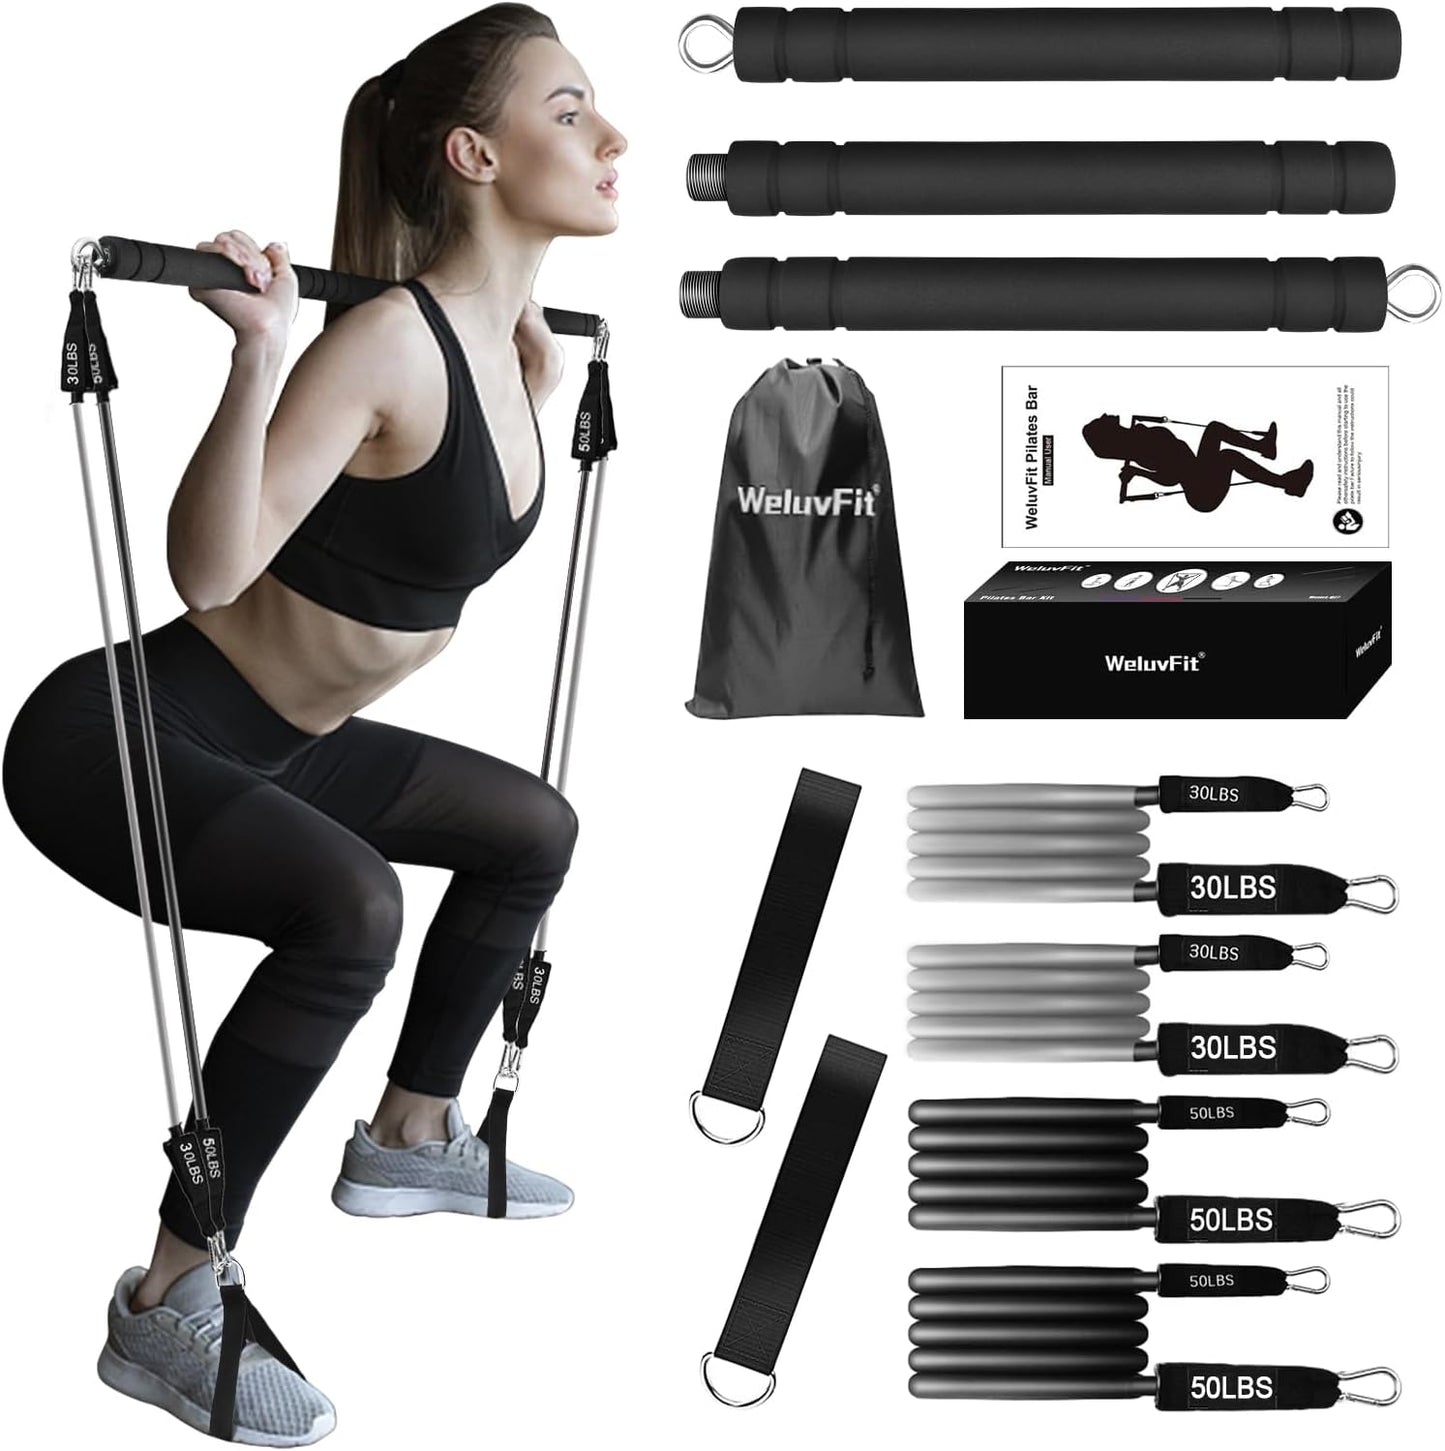 Pilates Bar Kit with Resistance Bands,  Exercise Fitness Equipment for Women & Men, Home Gym Workouts Stainless Steel Stick Squat Yoga Pilates Flexbands Kit for Full Body Shaping